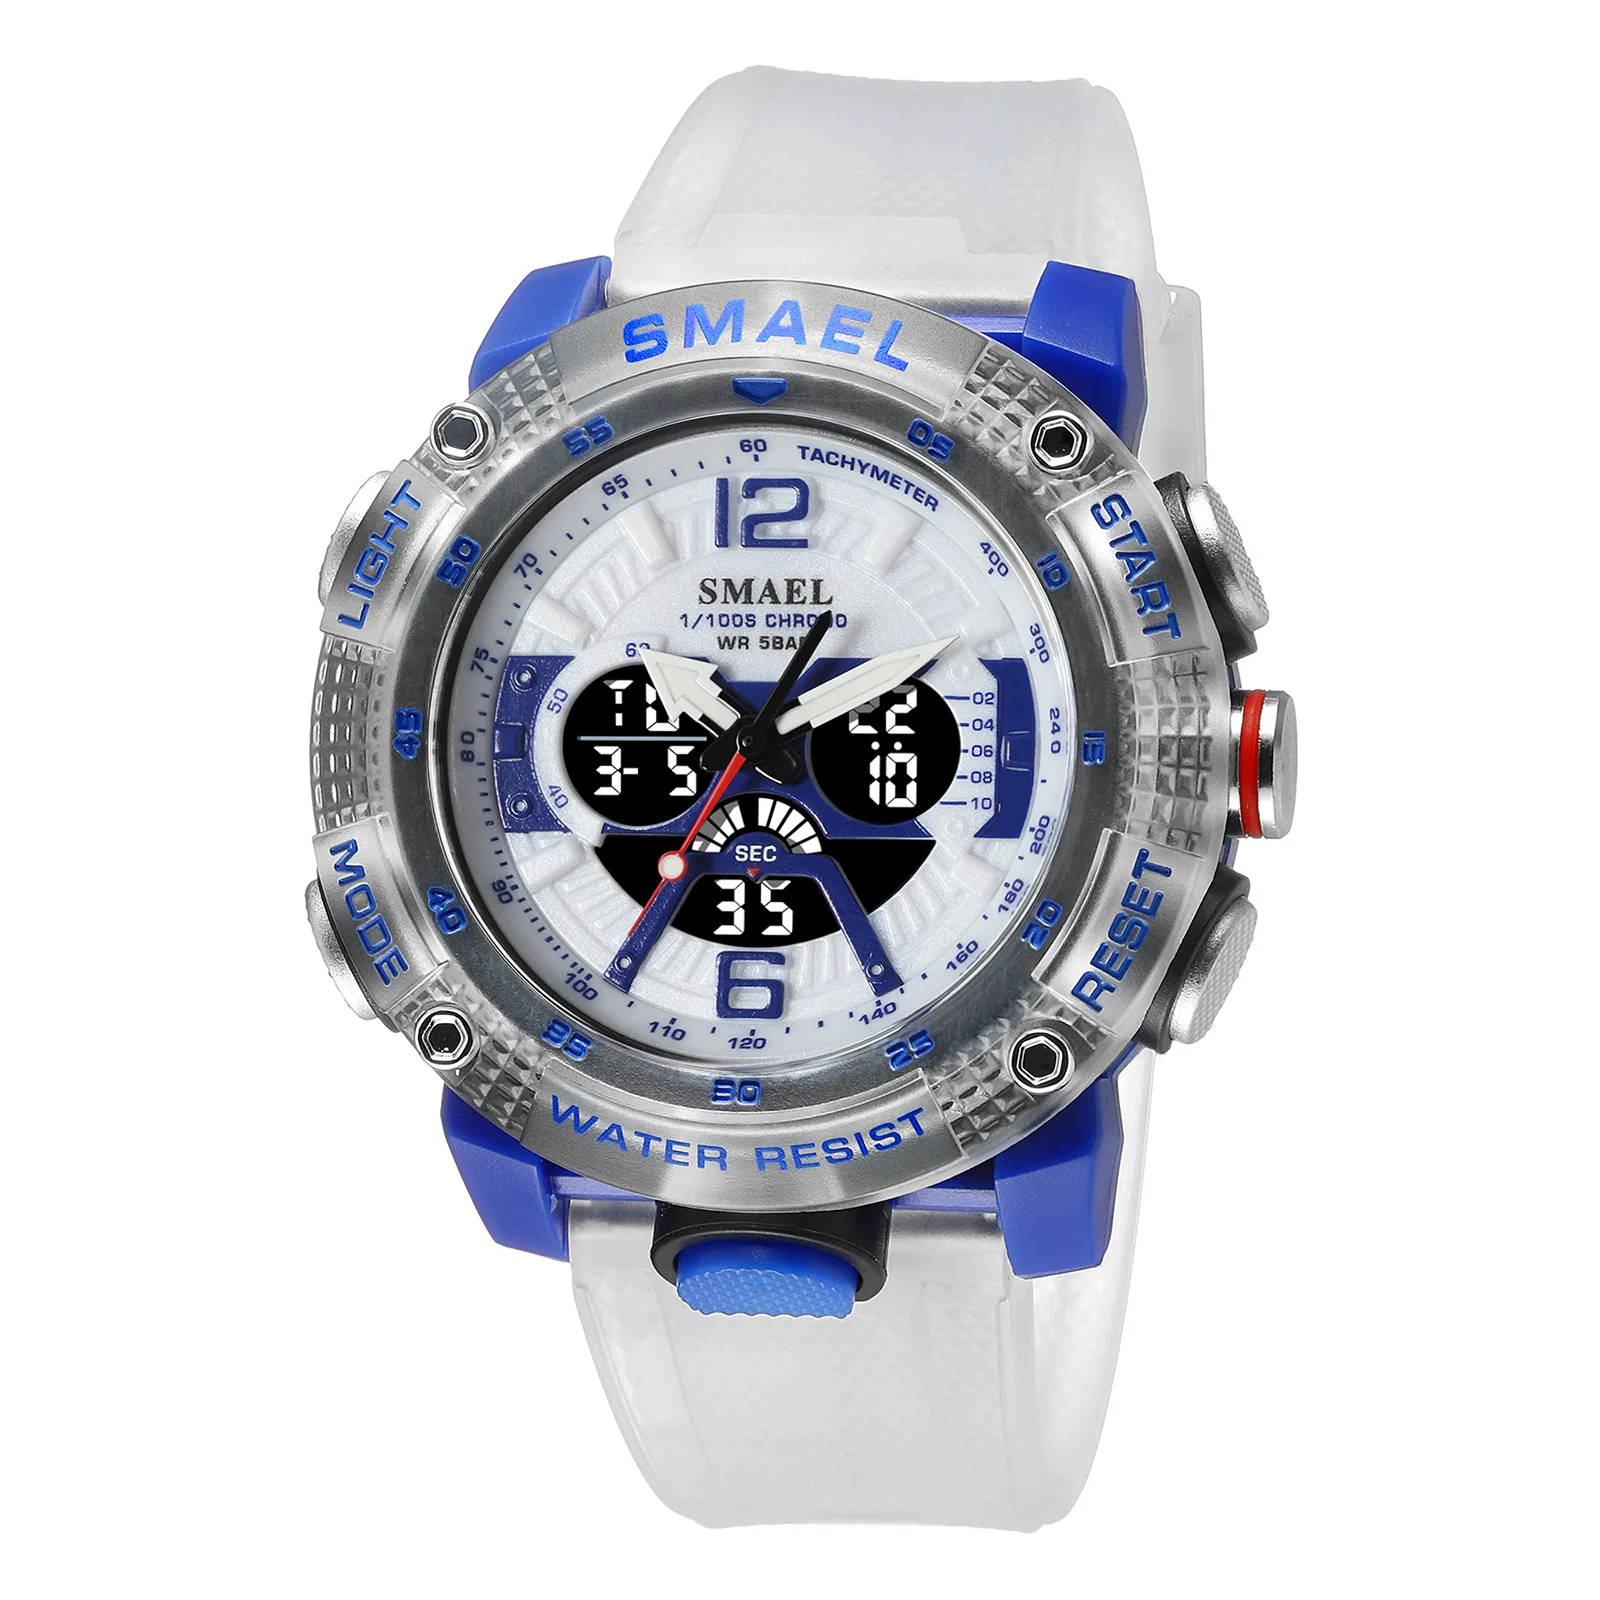 Electronic Sport Watch SMAEL 8006 | Watches | Watches & Clocks